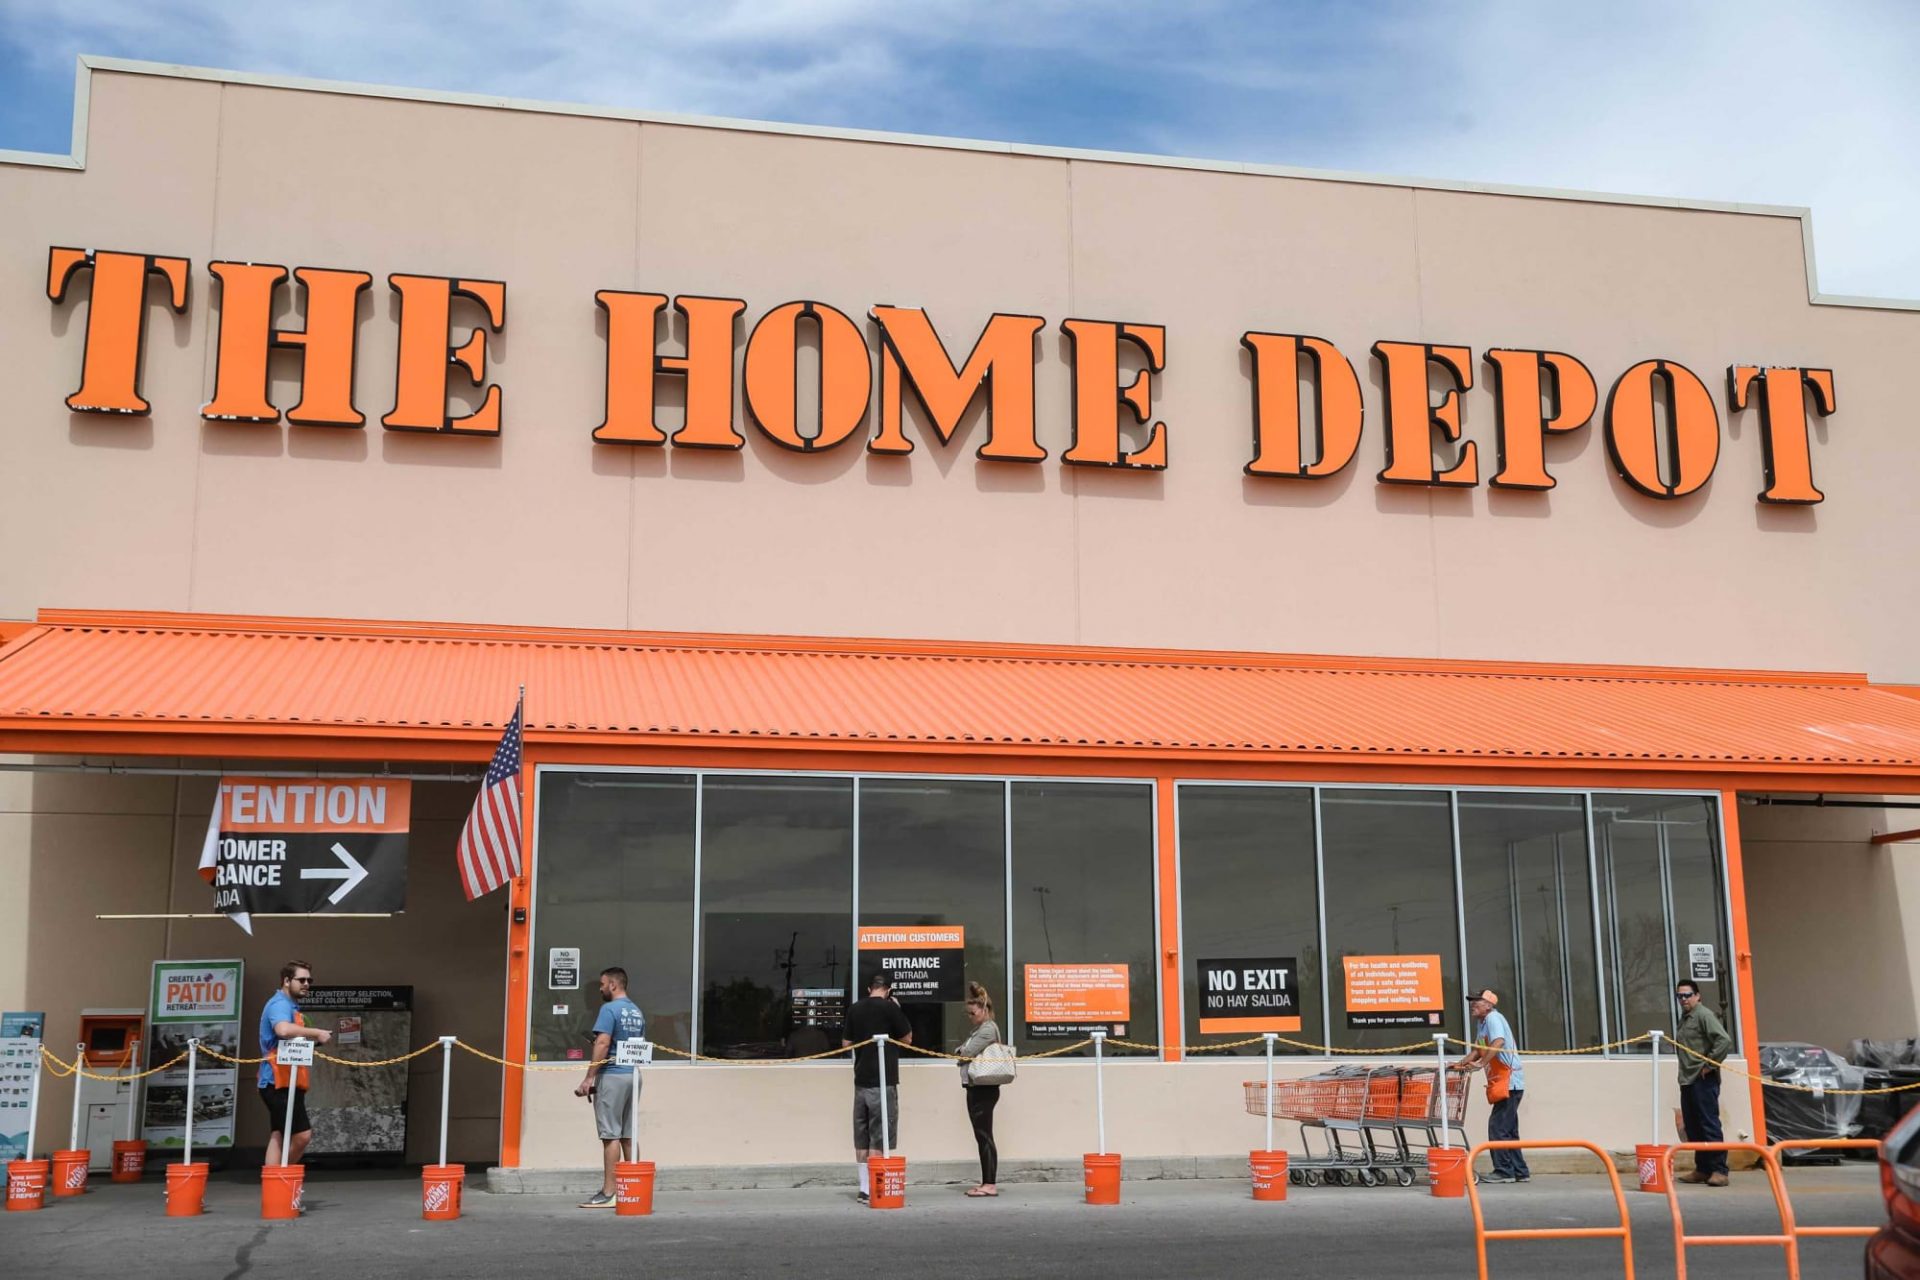 Is House Depot launch on Christmas Eve 2020?